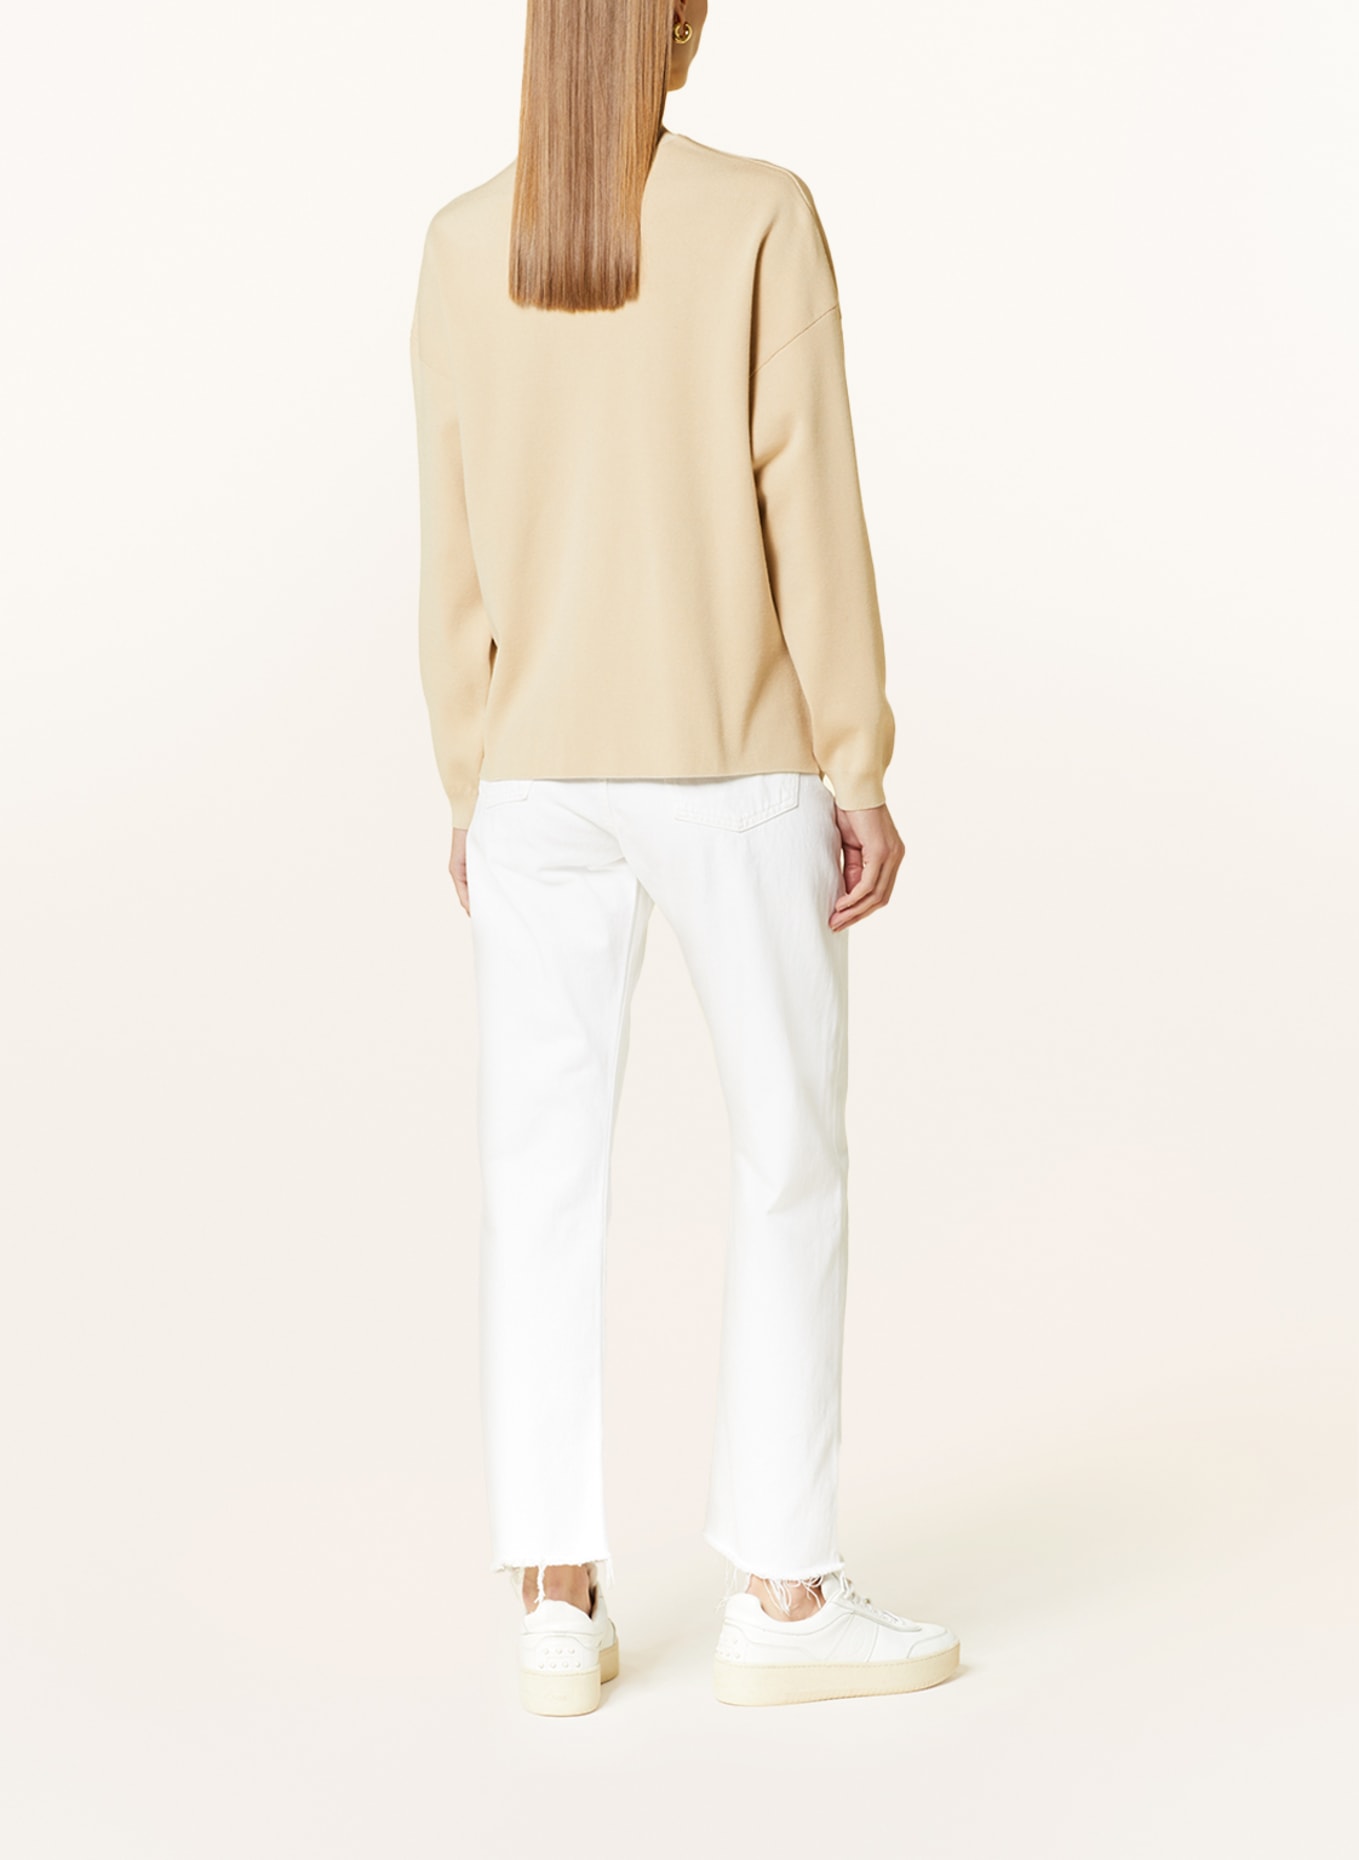 TED BAKER Pullover EMALLLY, Farbe: CREME (Bild 3)